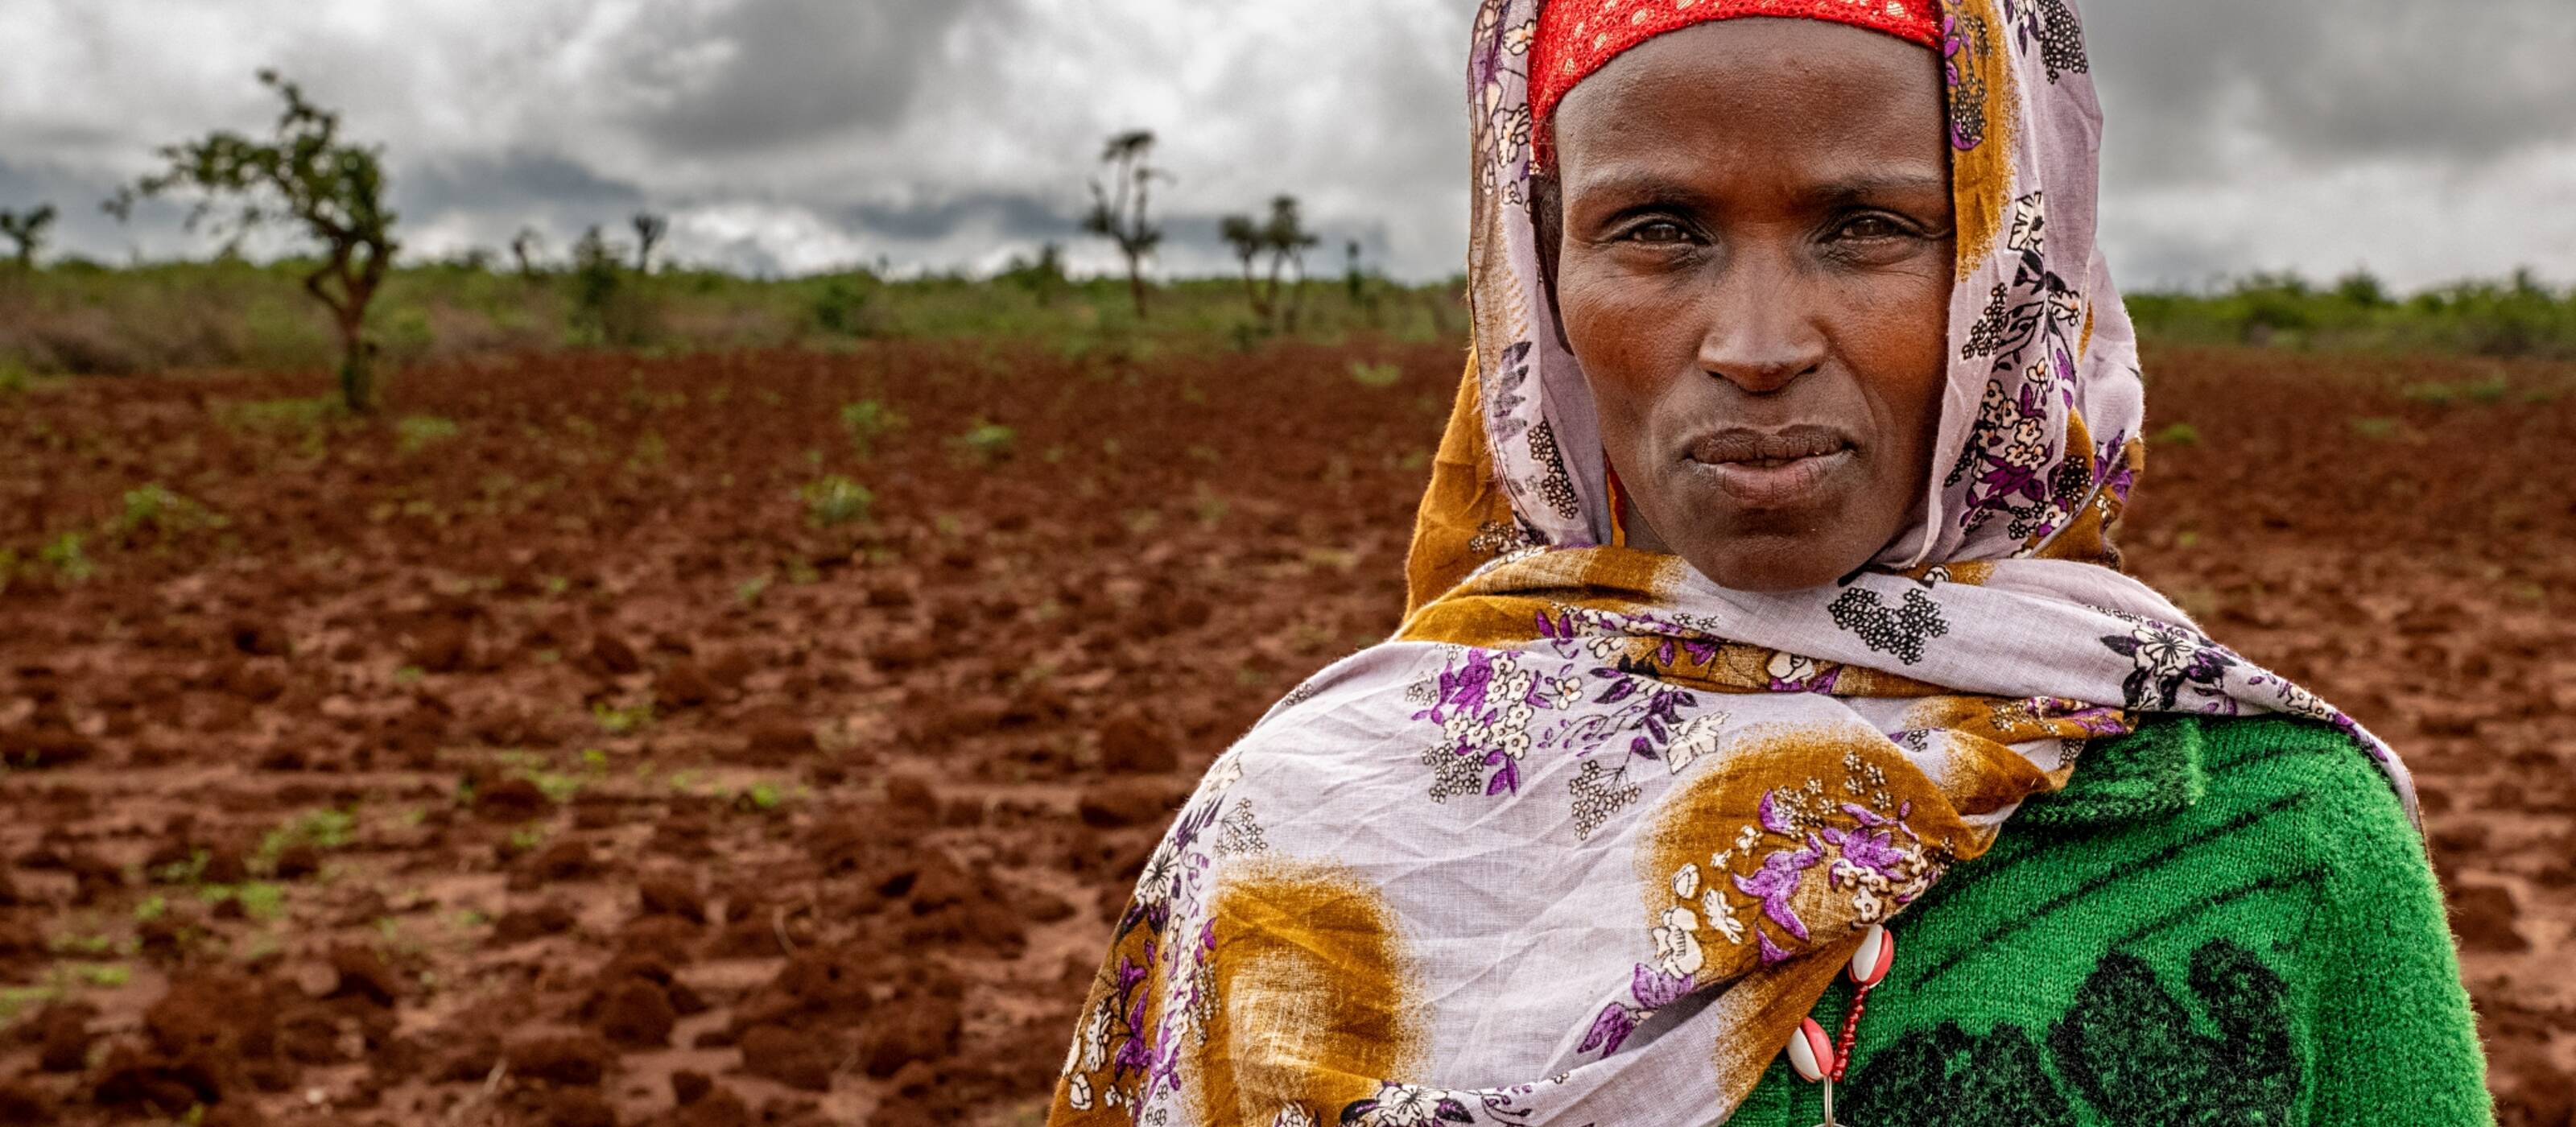 The small farmer Ensane from Ethiopia looks straight into the camera. The field behind her has dried up in the severe drought. 